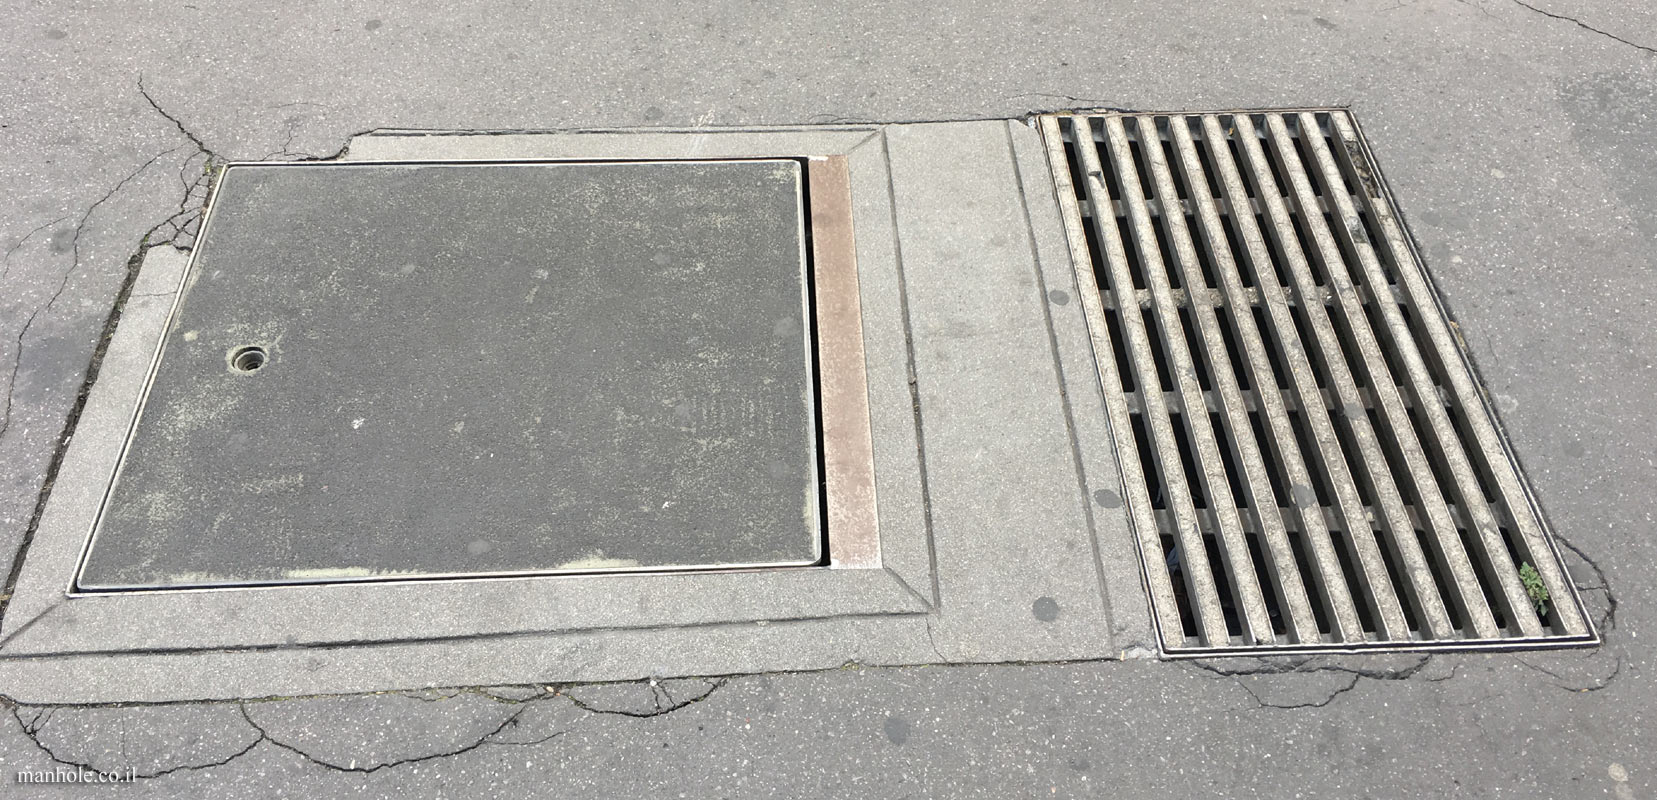 Paris - Concrete cover with a lifting hole and a drainage opening next to it